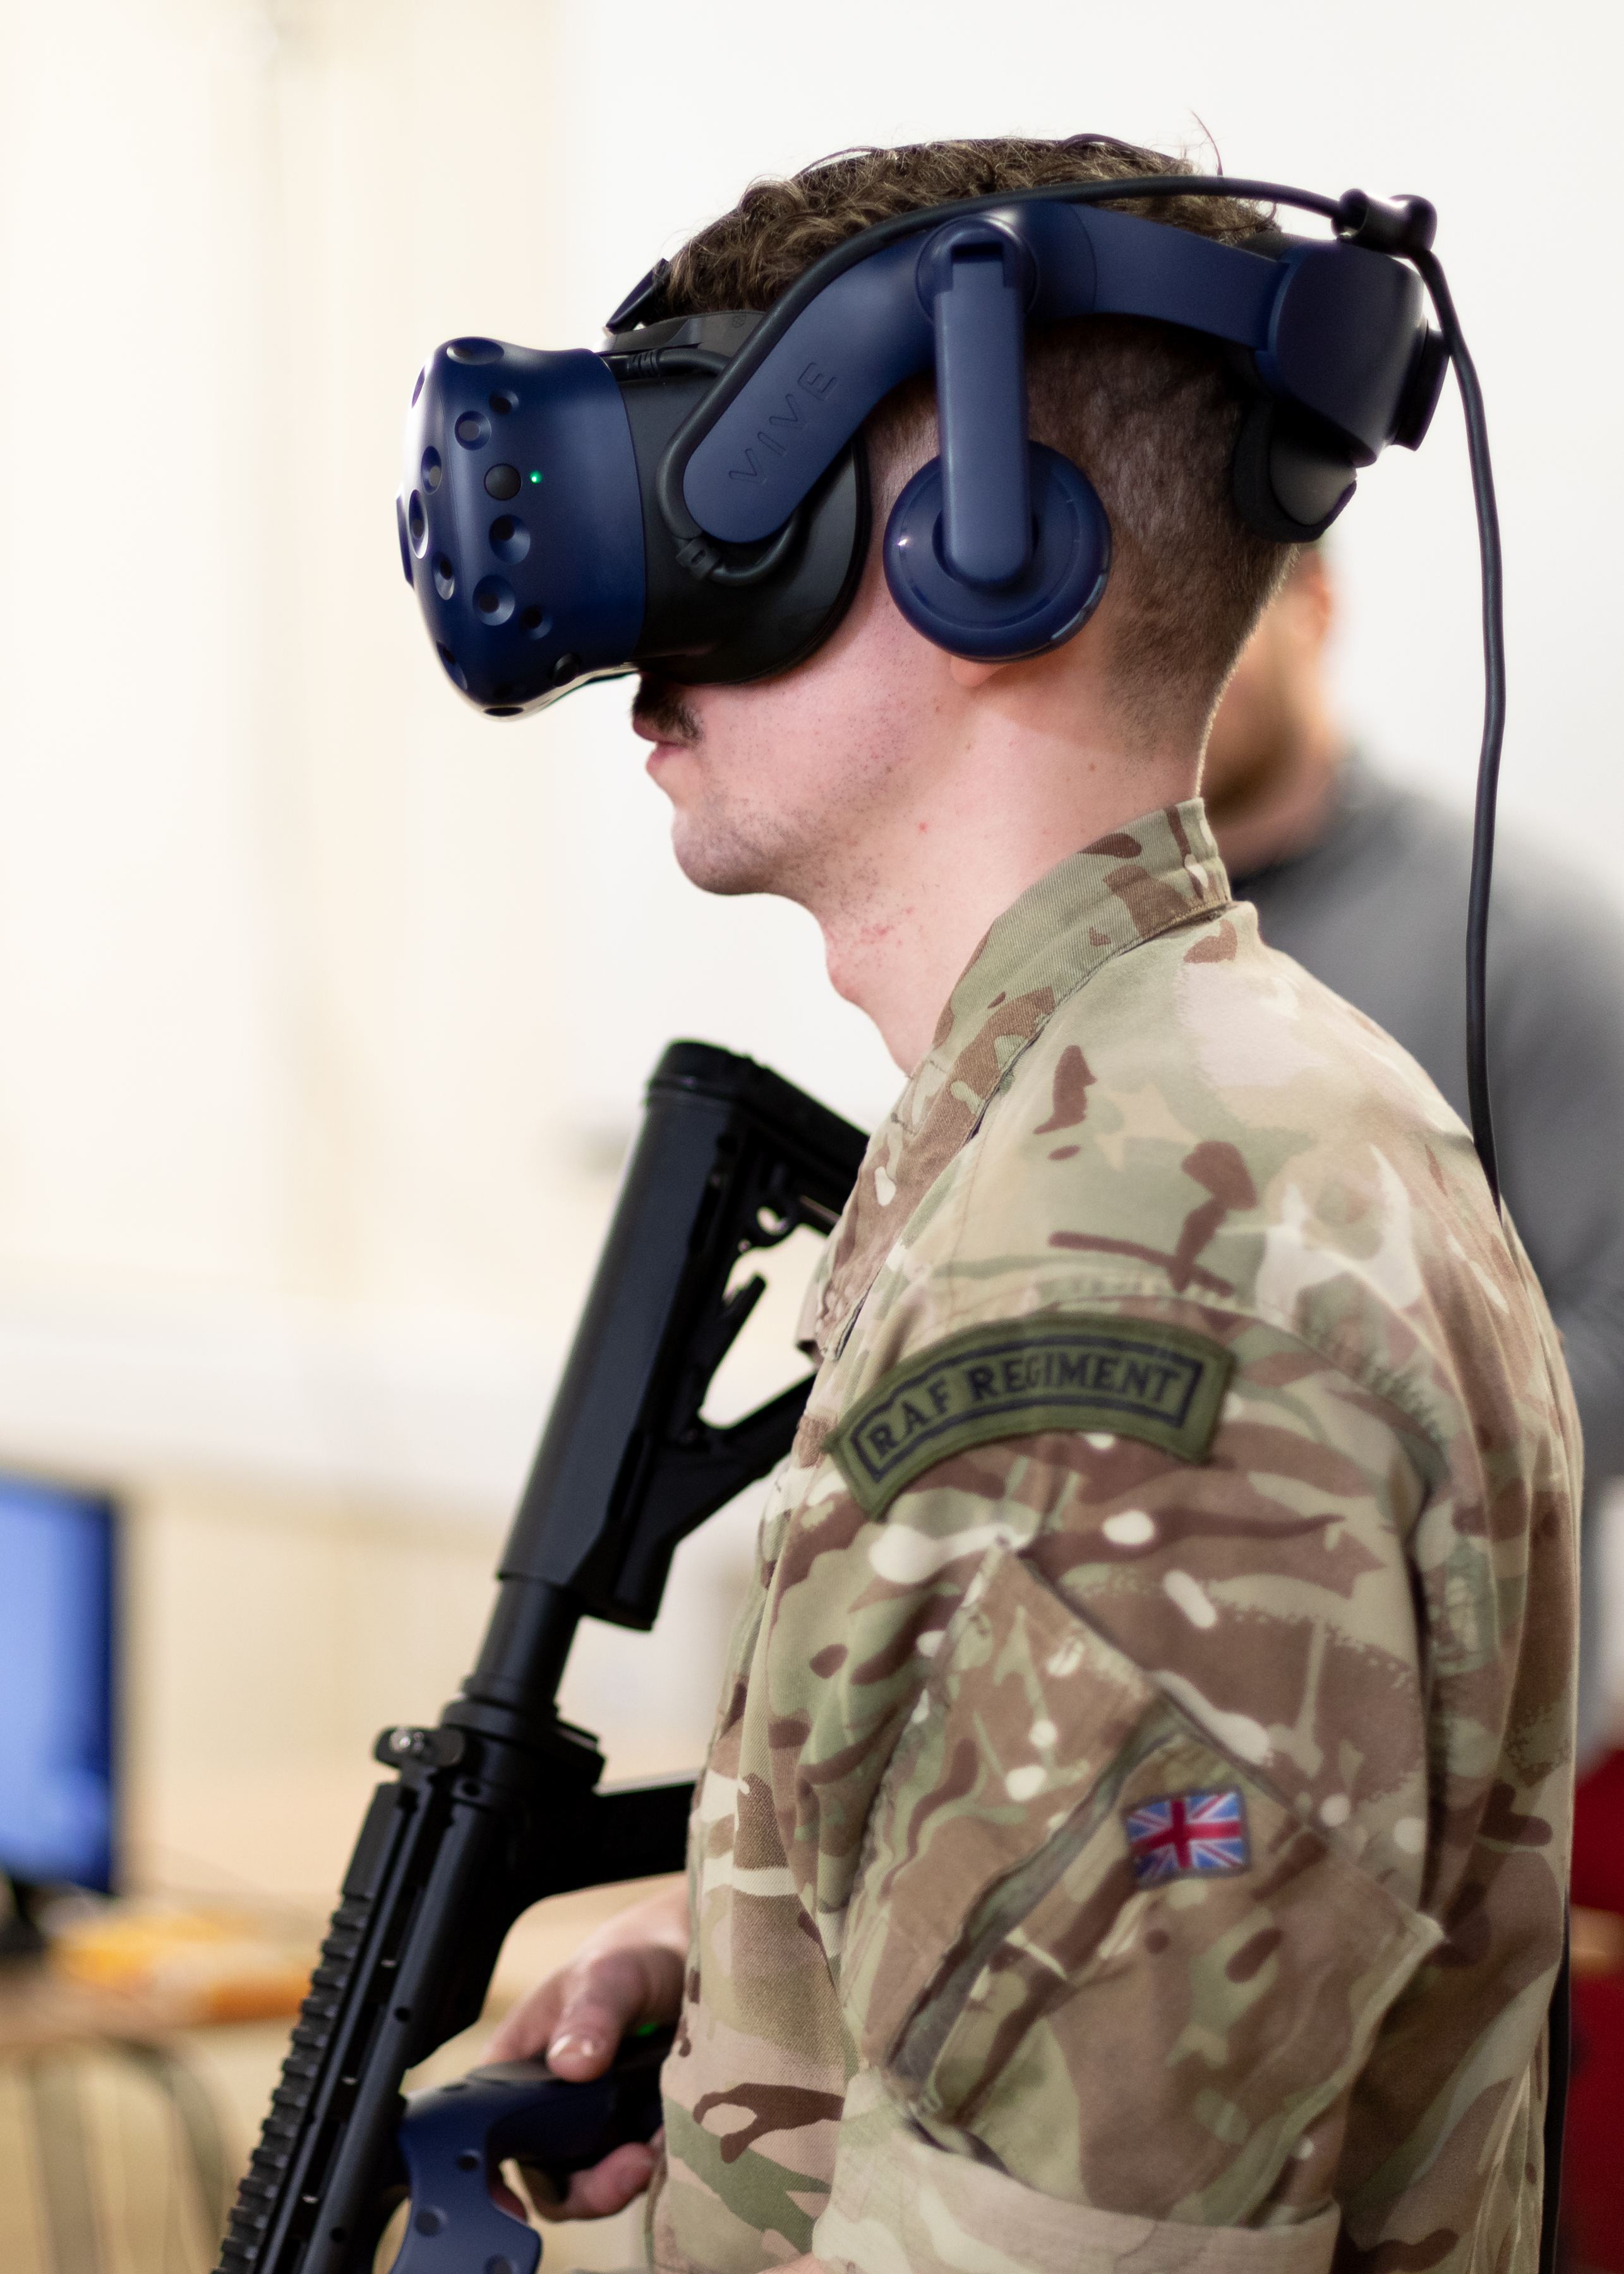 Personnel holds rifle while wearing virtual reality headset.